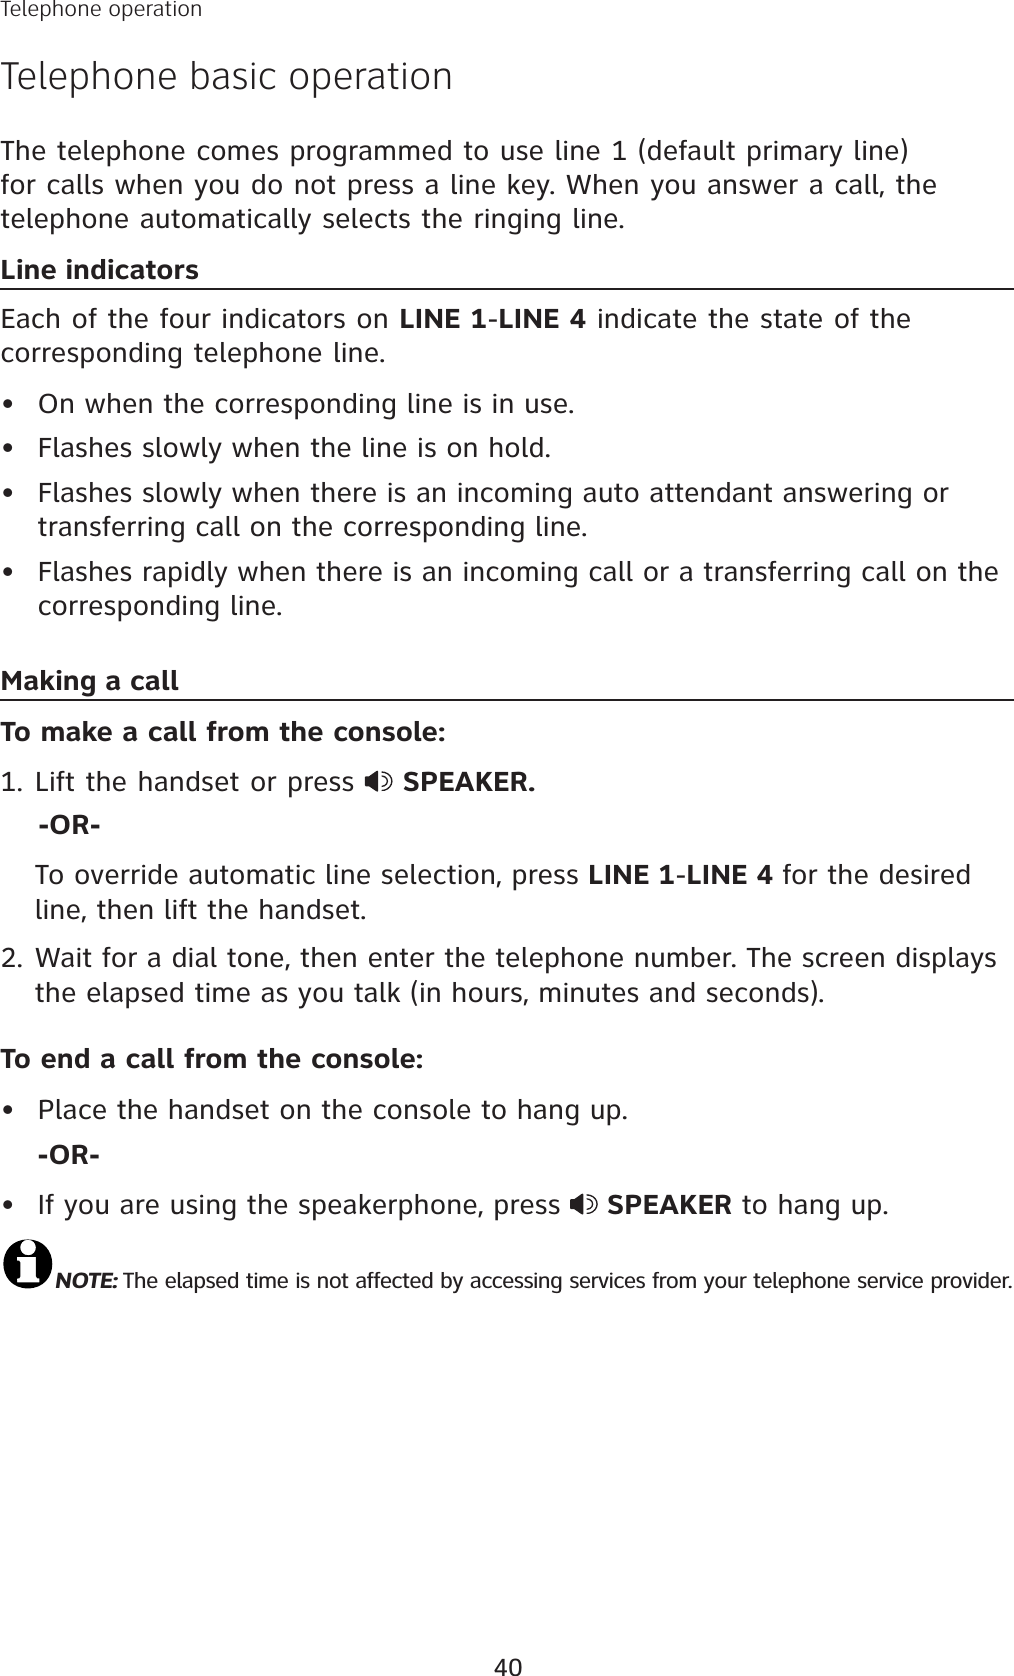 40Telephone operationTelephone basic operationThe telephone comes programmed to use line 1 (default primary line) for calls when you do not press a line key. When you answer a call, the telephone automatically selects the ringing line. Line indicatorsEach of the four indicators on LINE 1-LINE 4 indicate the state of the corresponding telephone line. On when the corresponding line is in use.Flashes slowly when the line is on hold.Flashes slowly when there is an incoming auto attendant answering or transferring call on the corresponding line. Flashes rapidly when there is an incoming call or a transferring call on the corresponding line.Making a callTo make a call from the console:Lift the handset or press  SPEAKER.    -OR-To override automatic line selection, press LINE 1-LINE 4 for the desired line, then lift the handset. 2. Wait for a dial tone, then enter the telephone number. The screen displays the elapsed time as you talk (in hours, minutes and seconds). To end a call from the console:Place the handset on the console to hang up.-OR-If you are using the speakerphone, press  SPEAKER to hang up.NOTE: The elapsed time is not affected by accessing services from your telephone service provider.••••1.••